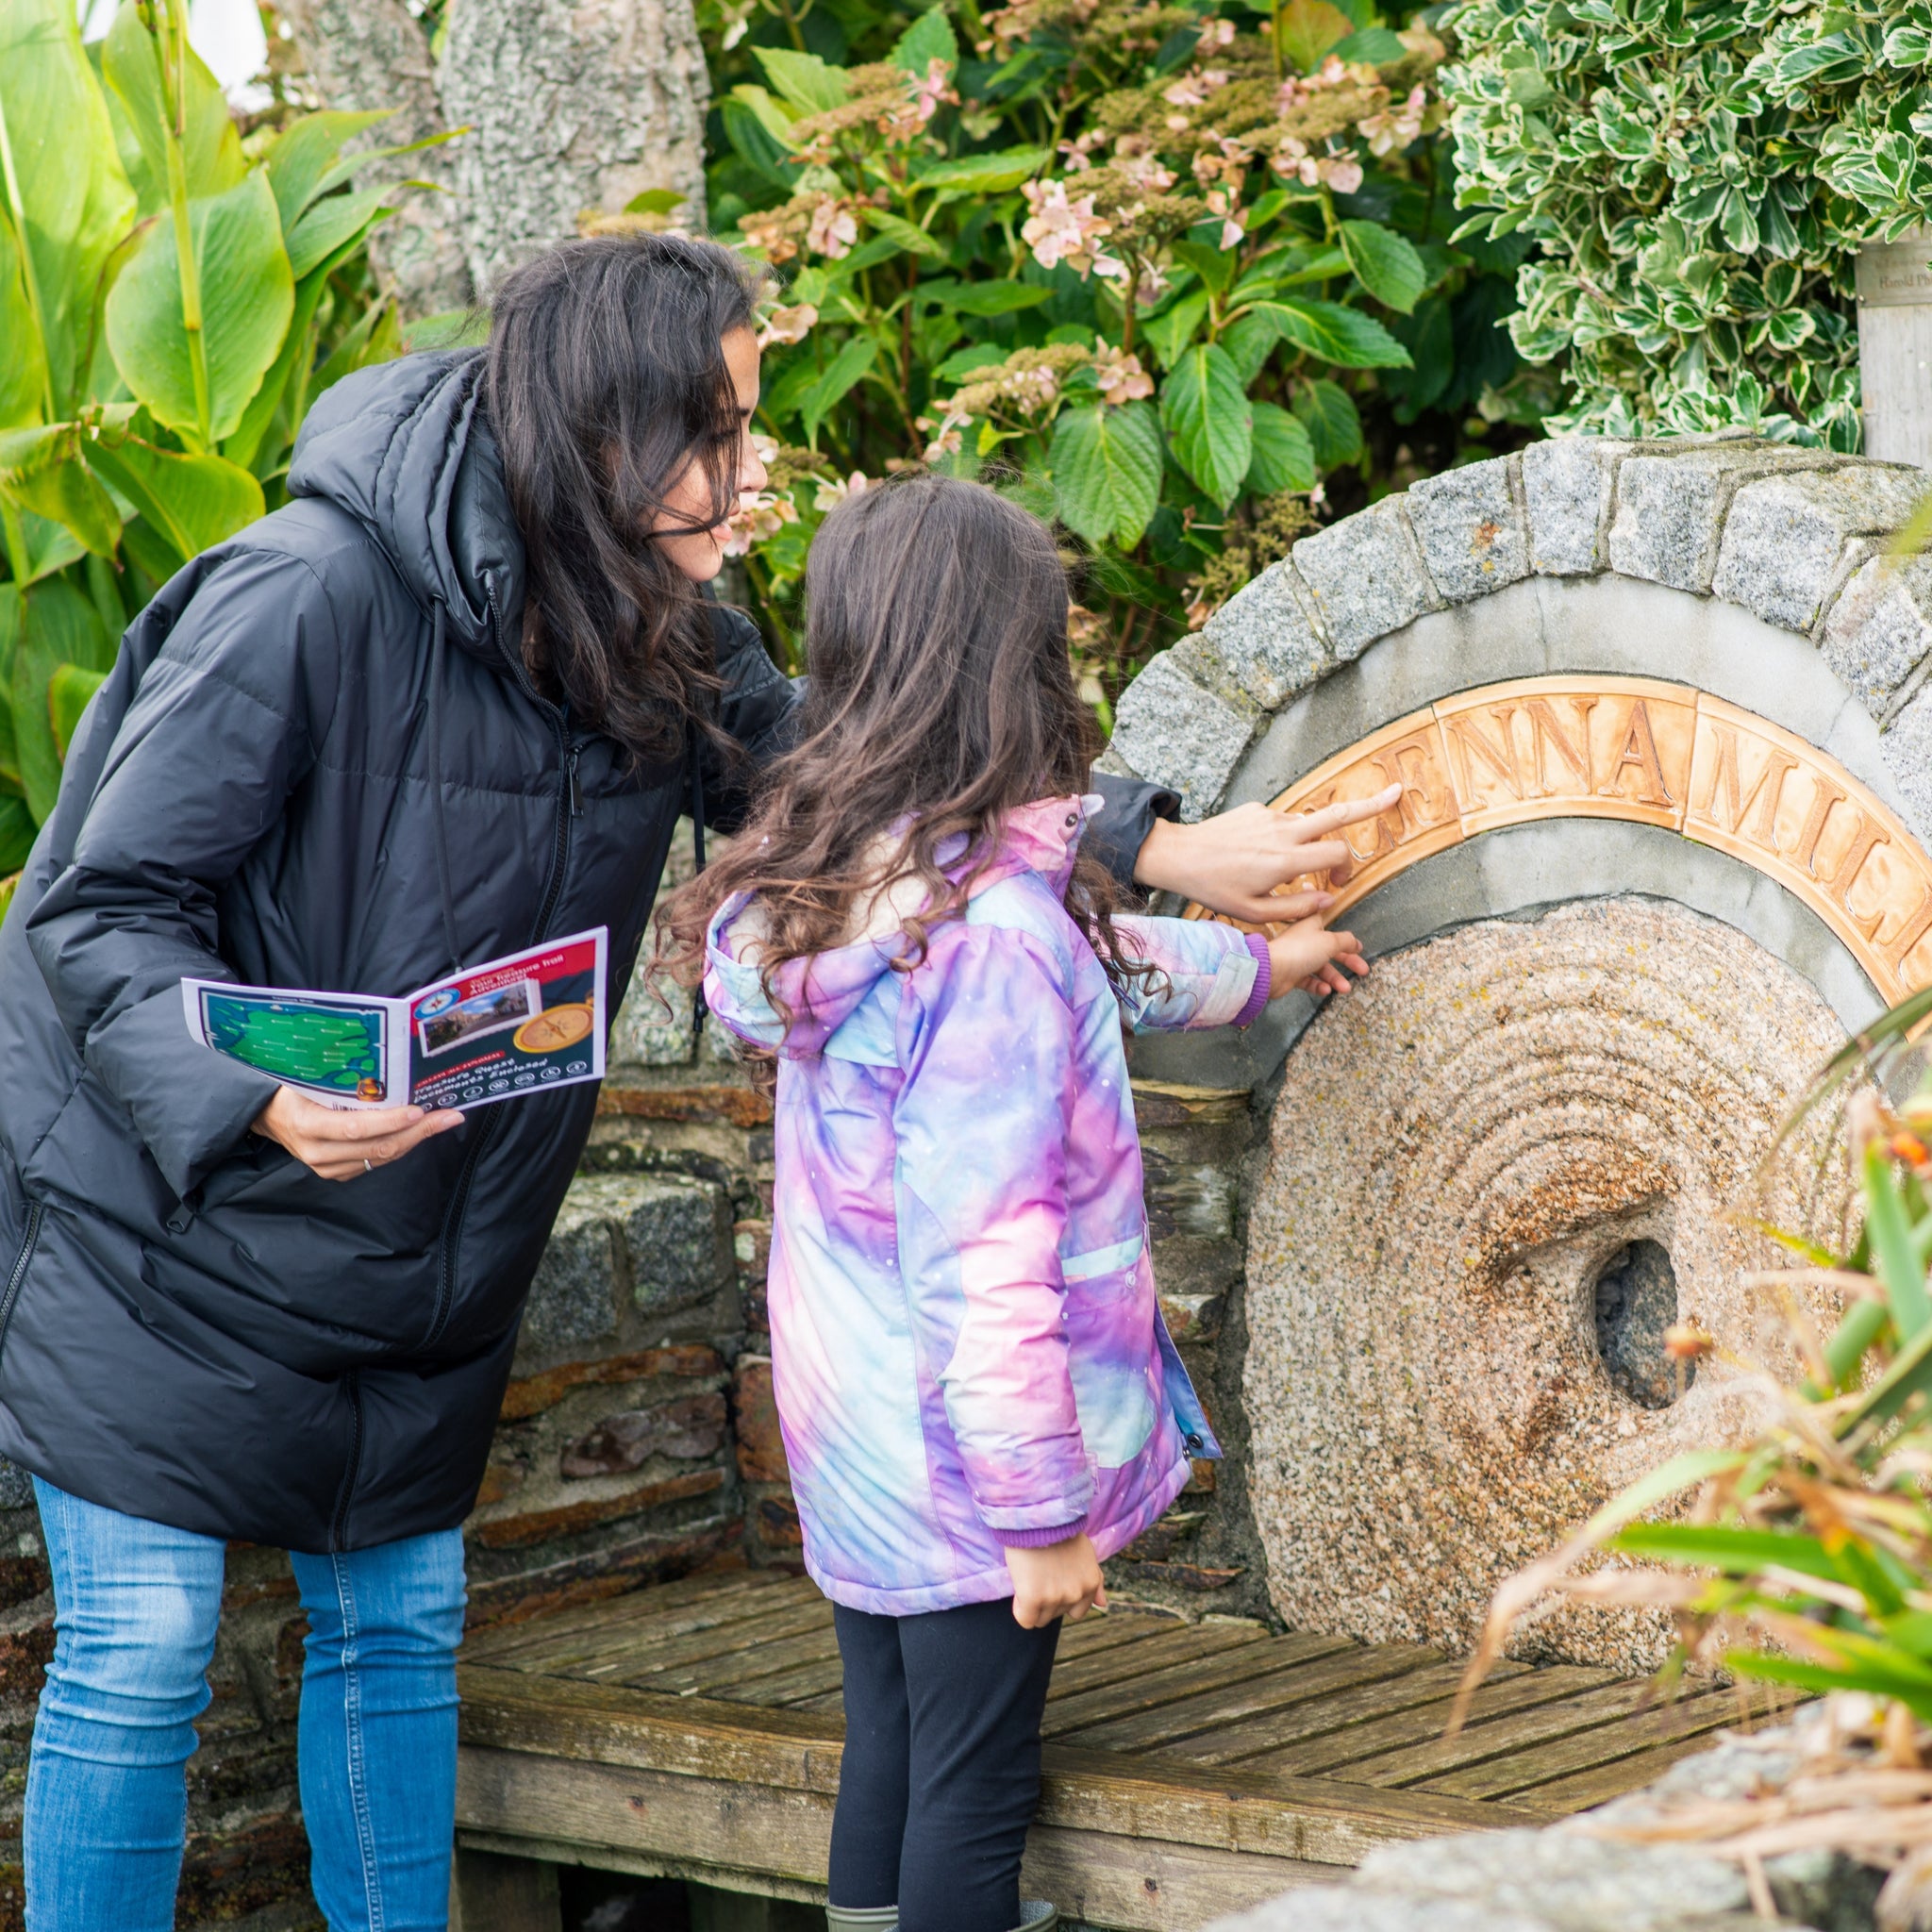 Explore with your senses on a Treasure Trail